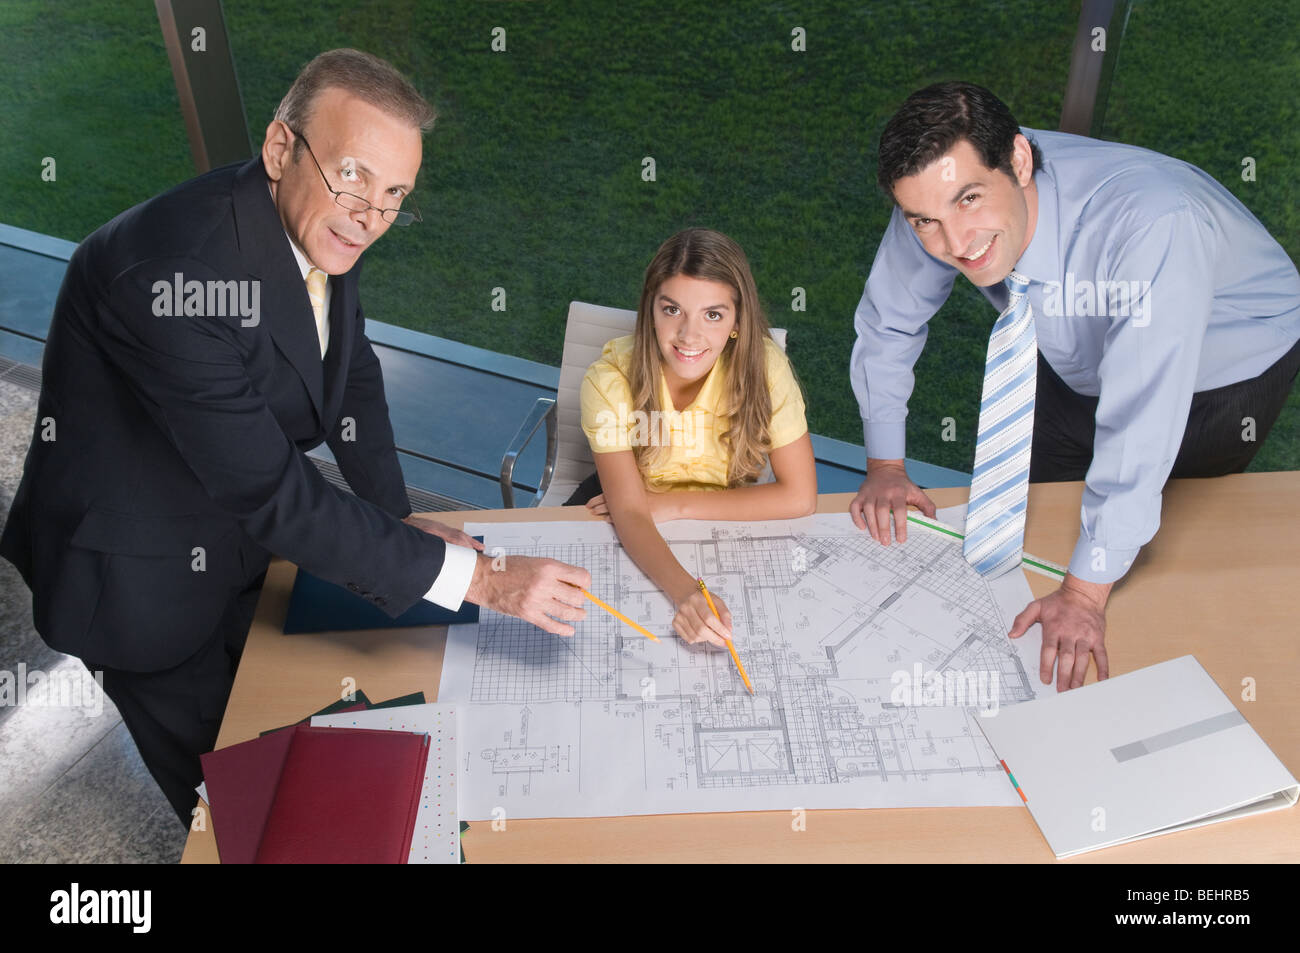 Portrait of business executives discussing a blueprint in an office Stock Photo